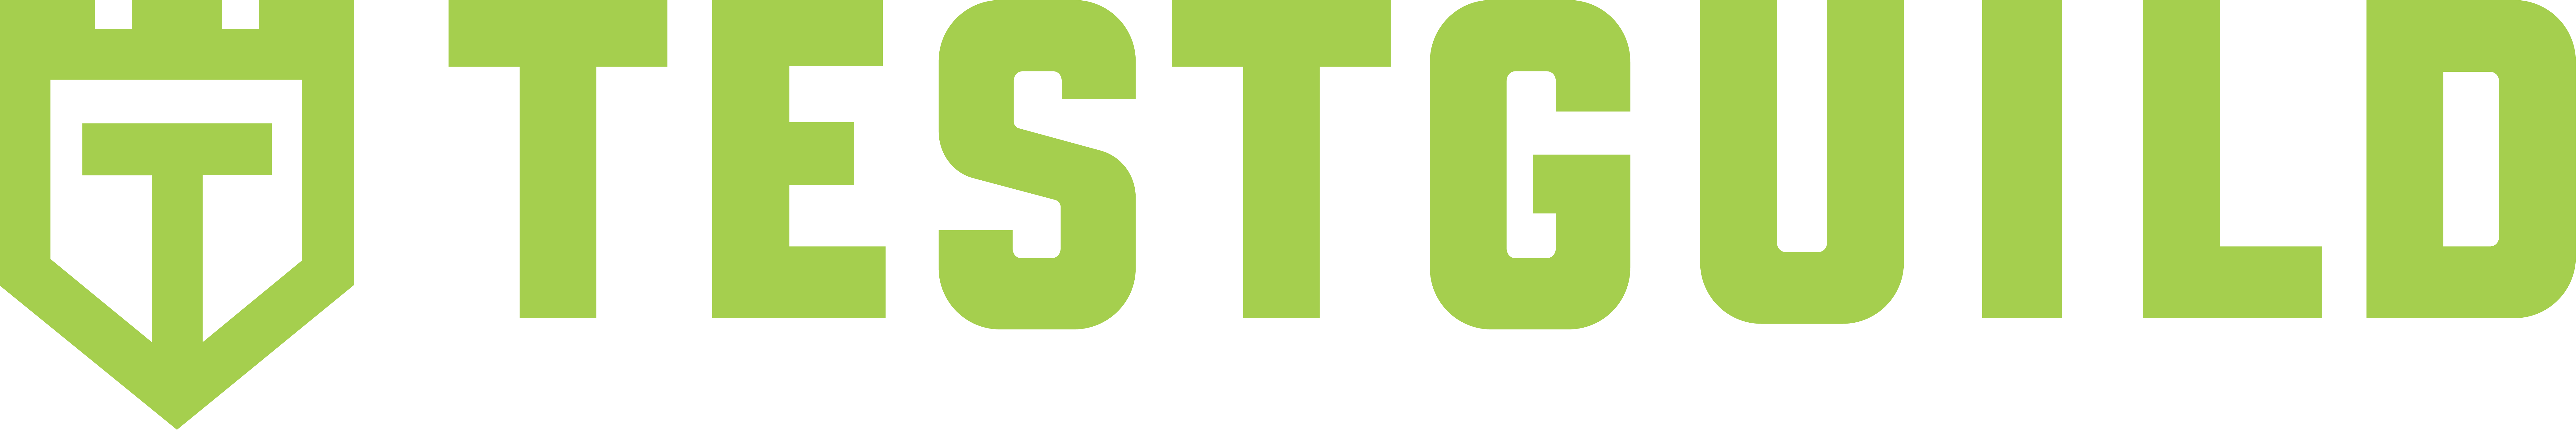 Logo of testguild with a stylized pencil and shield motif in green color scheme.